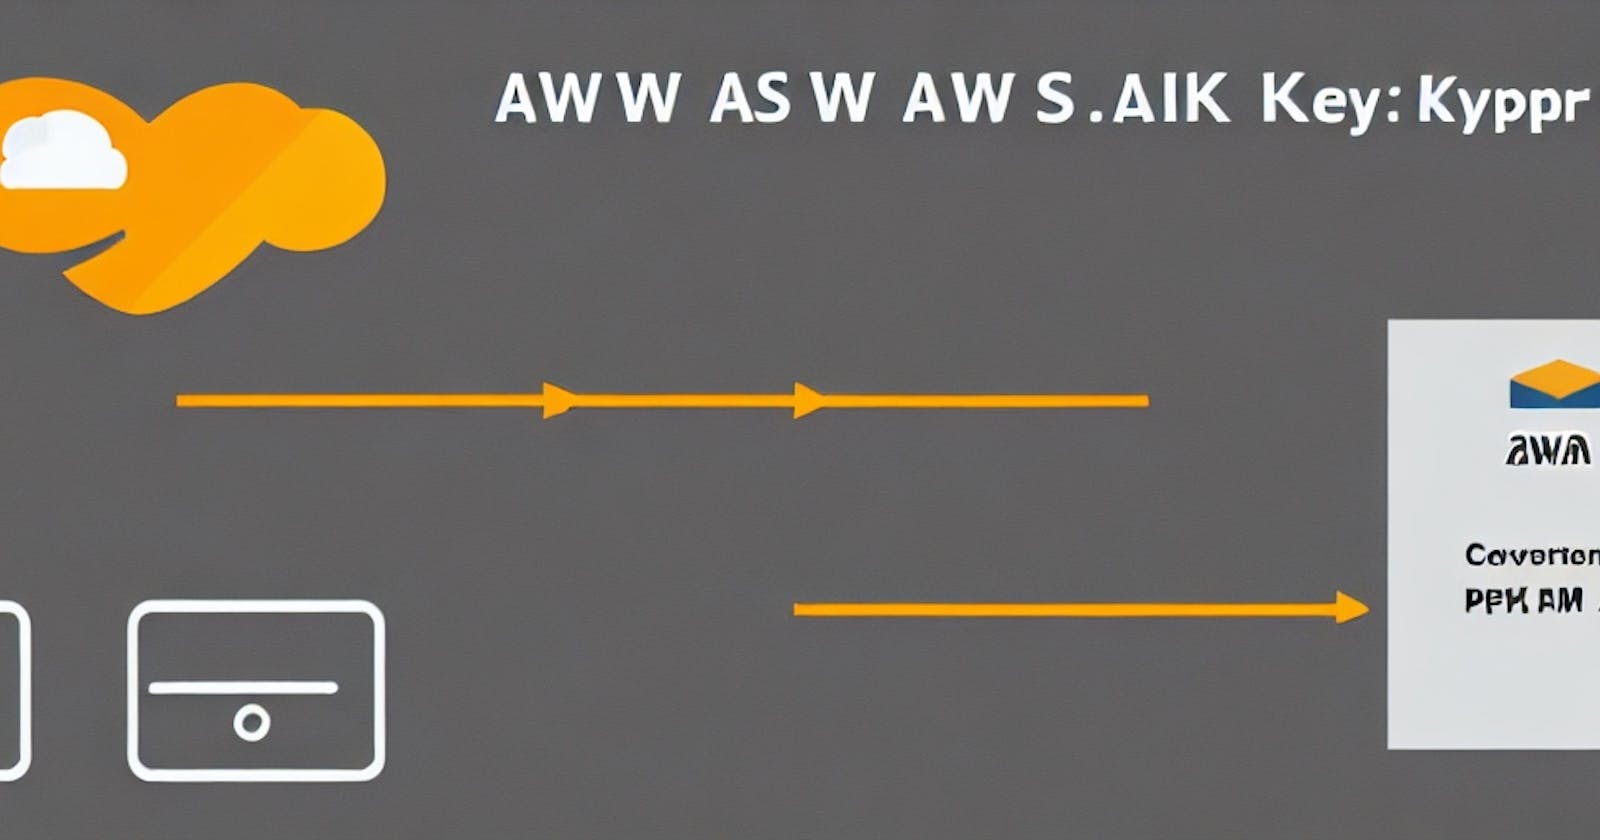 How to convert an AWS Keypair from .pem into a .ppk and vice versa